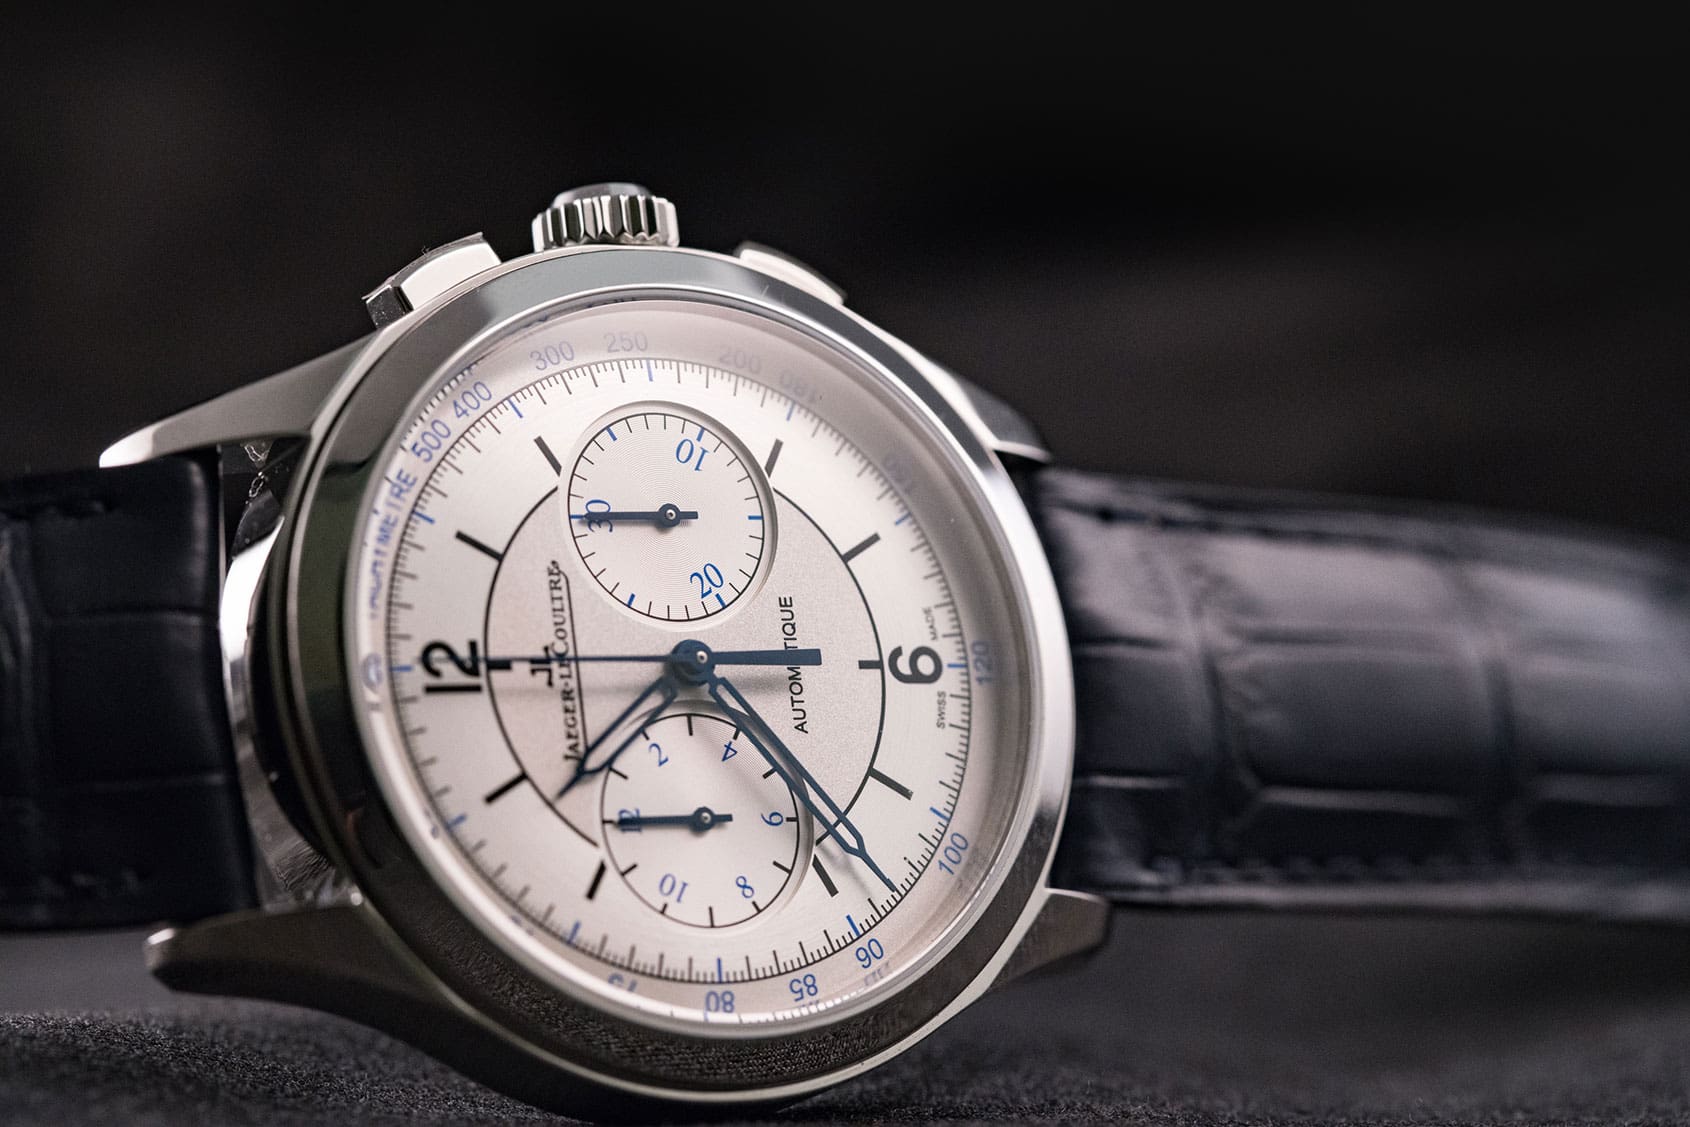 VIDEO: Jaeger-LeCoultre 2017 collection overview (including the watch that knocked us both out)